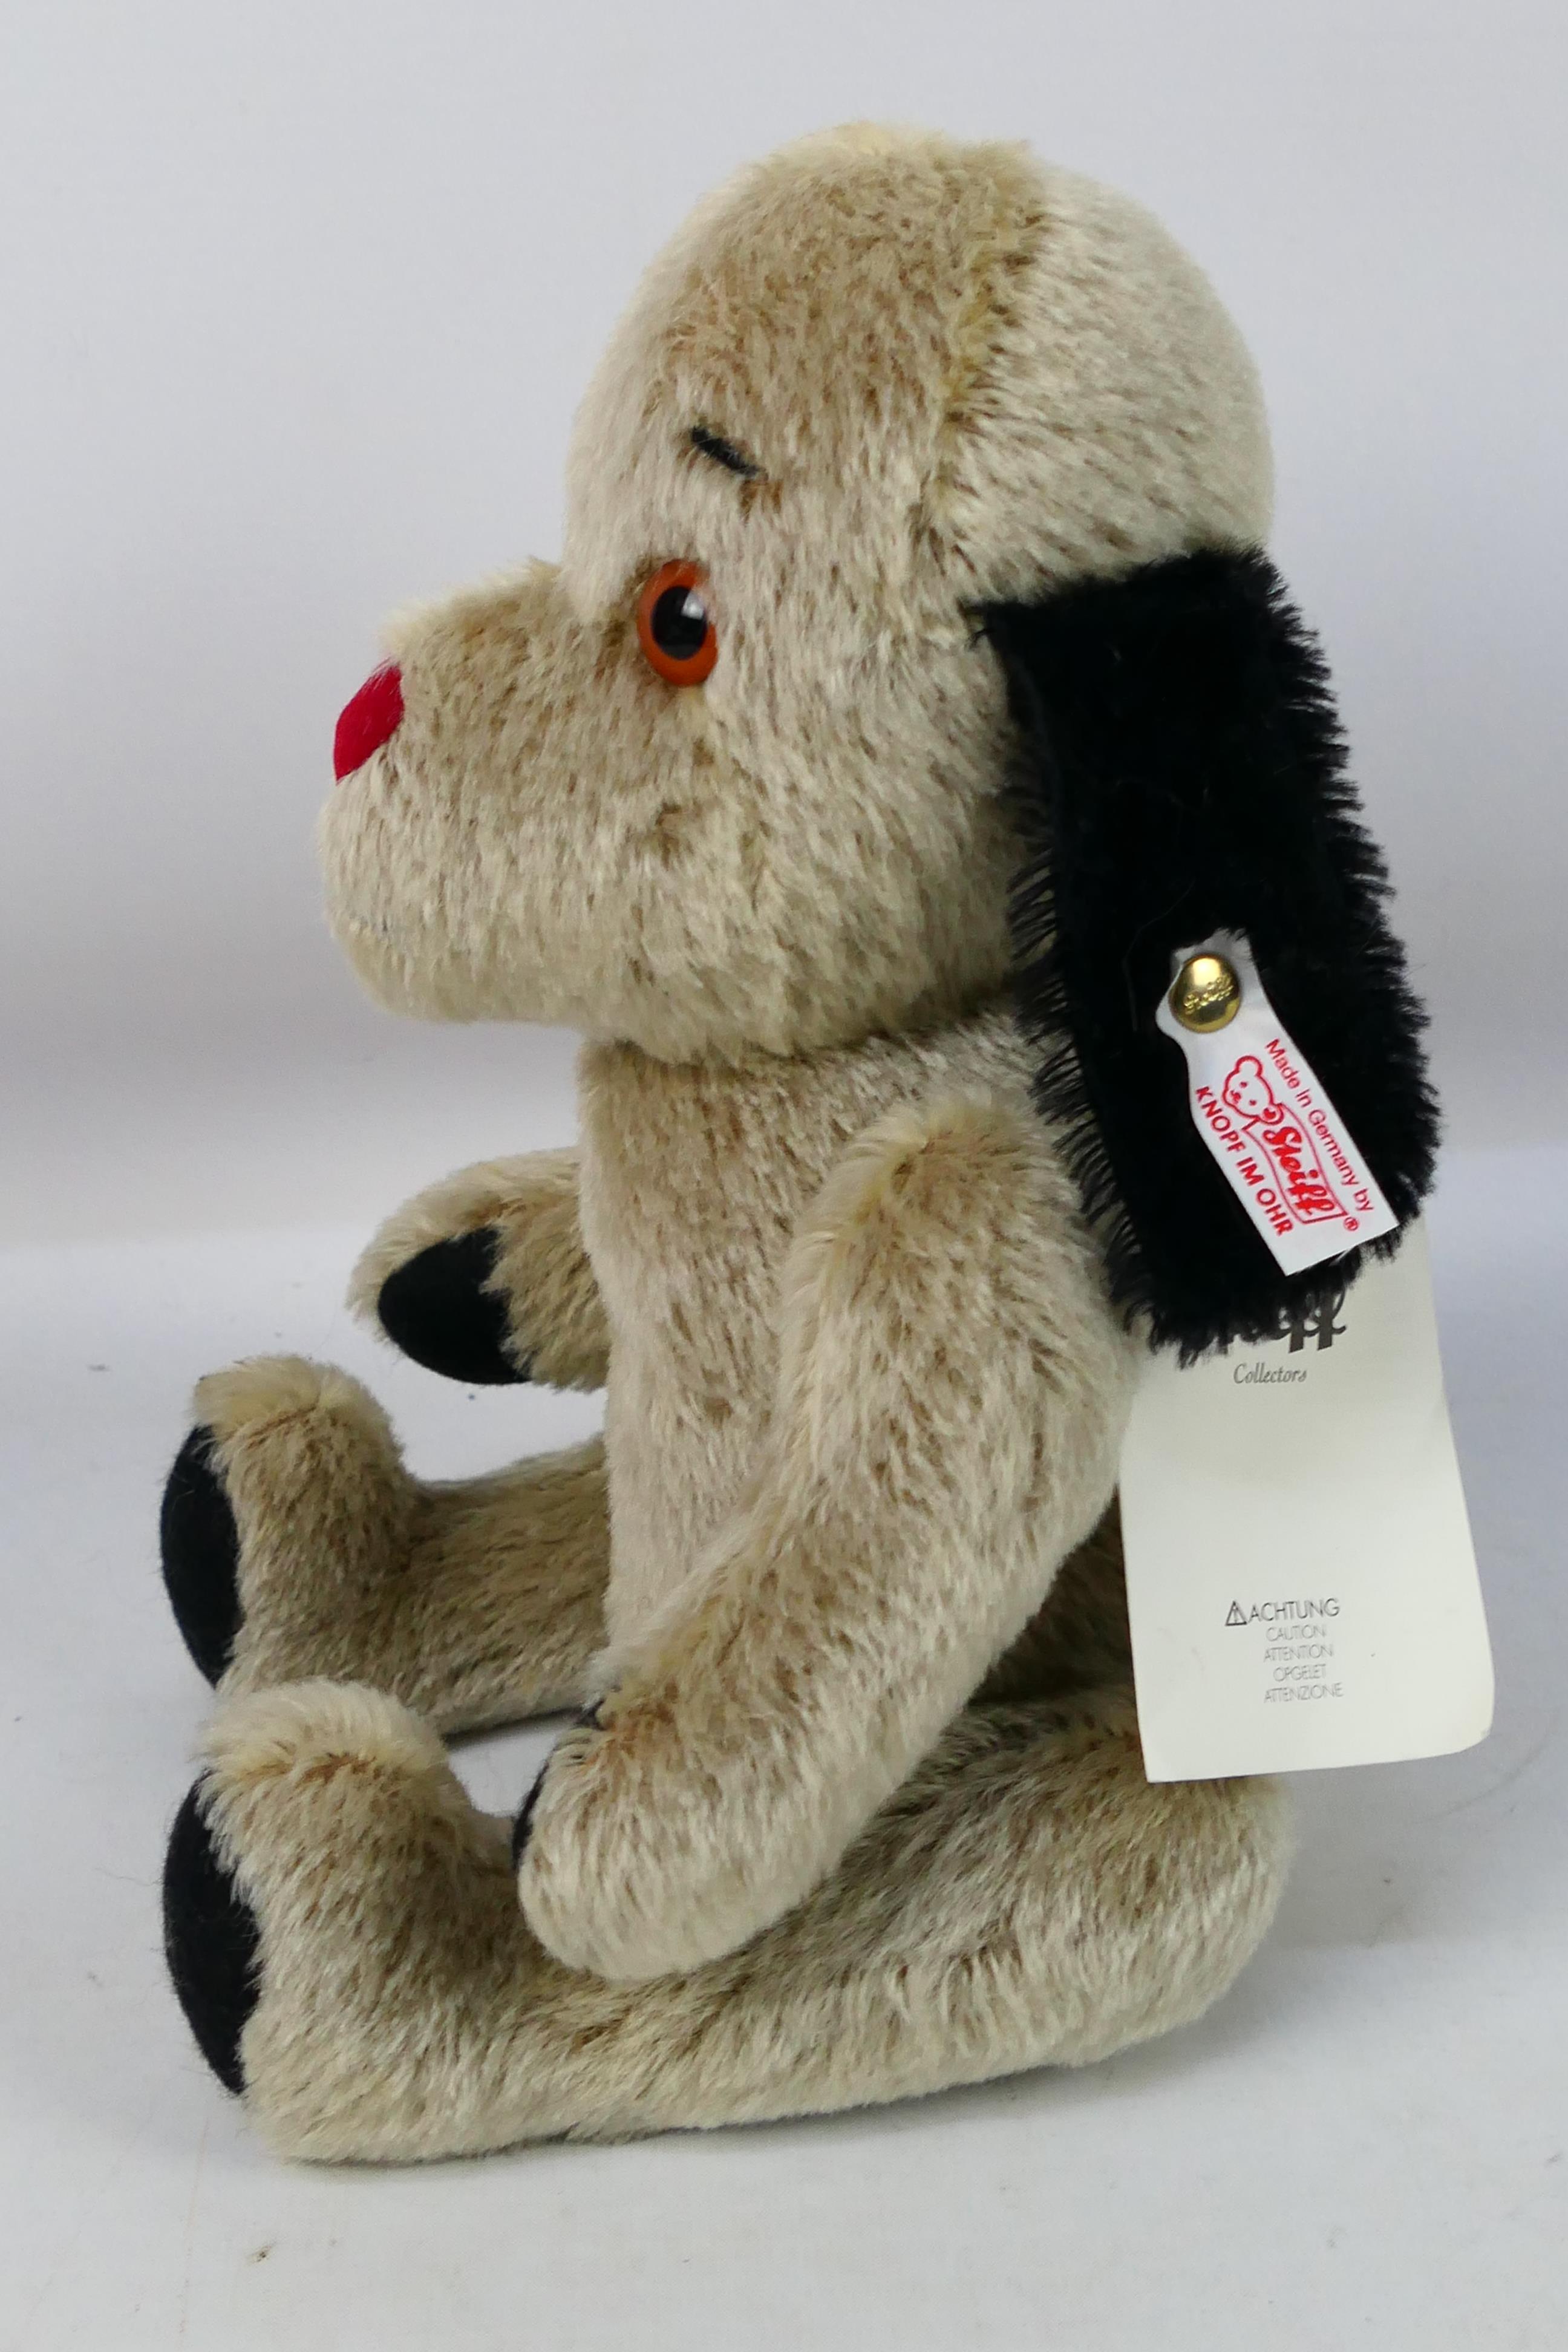 Steiff - Sooty Show - Plush - A Sweep Plush (#664410) from The Sooty Show, - Image 4 of 8